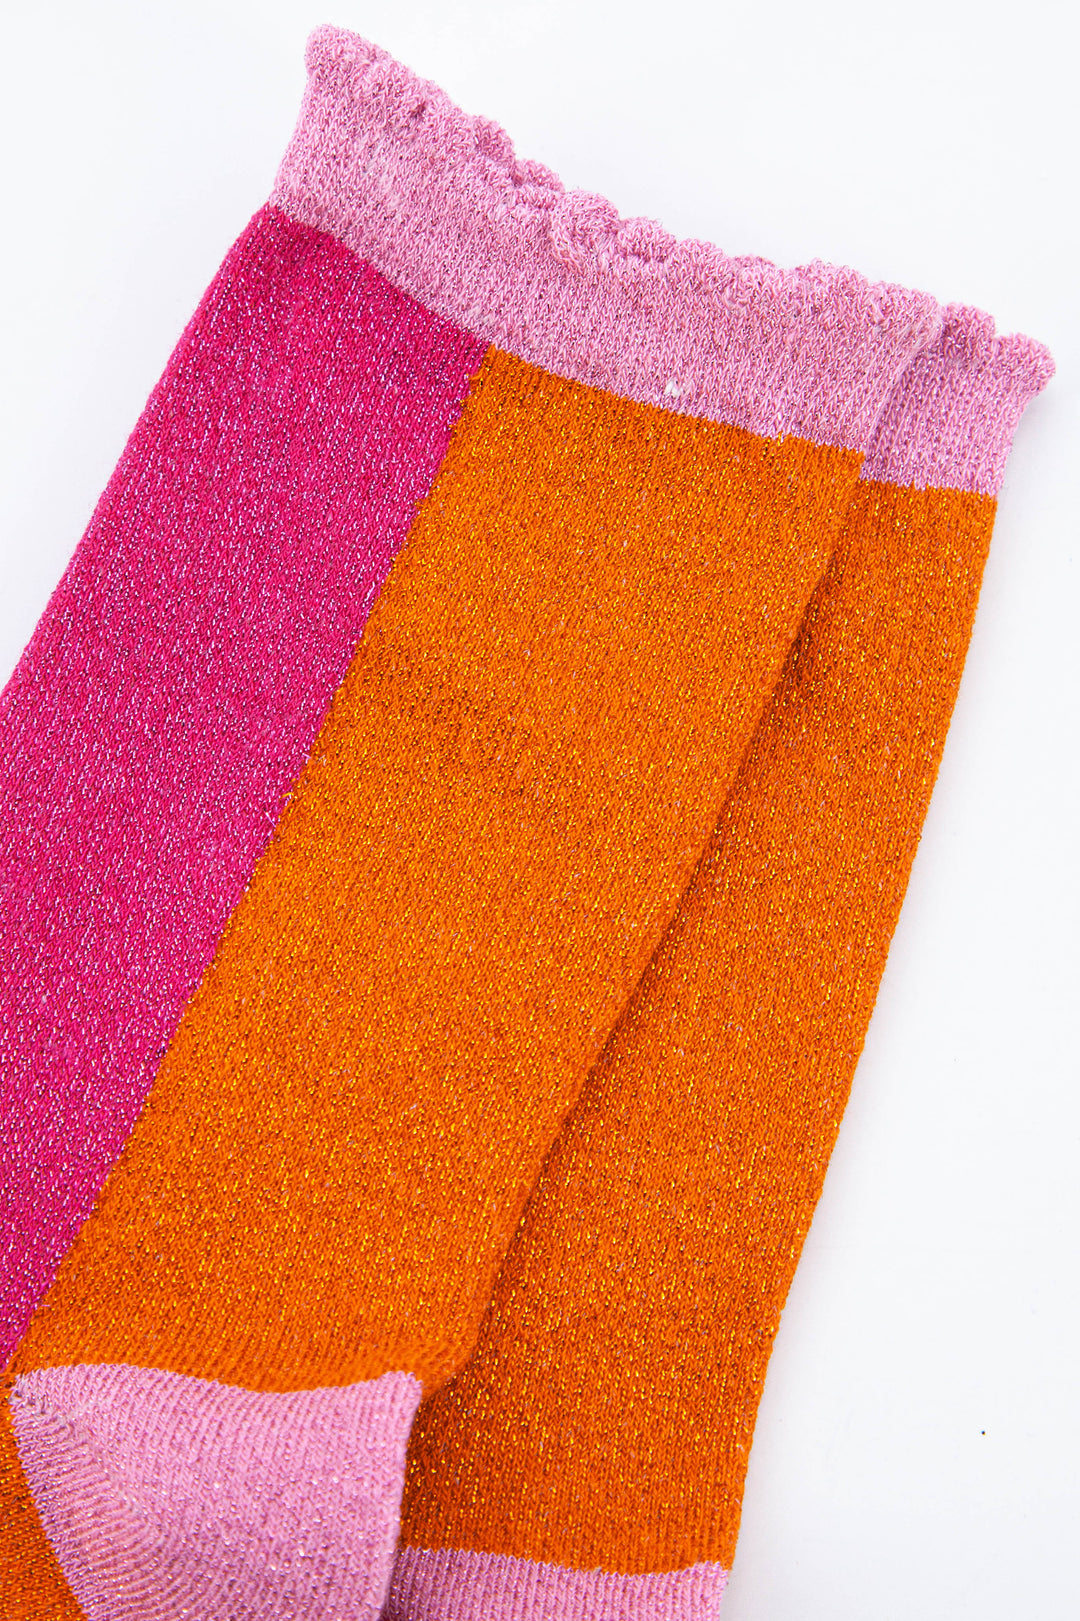 close up of the sparkly material and pink scalloped top on these ladies cotton socks